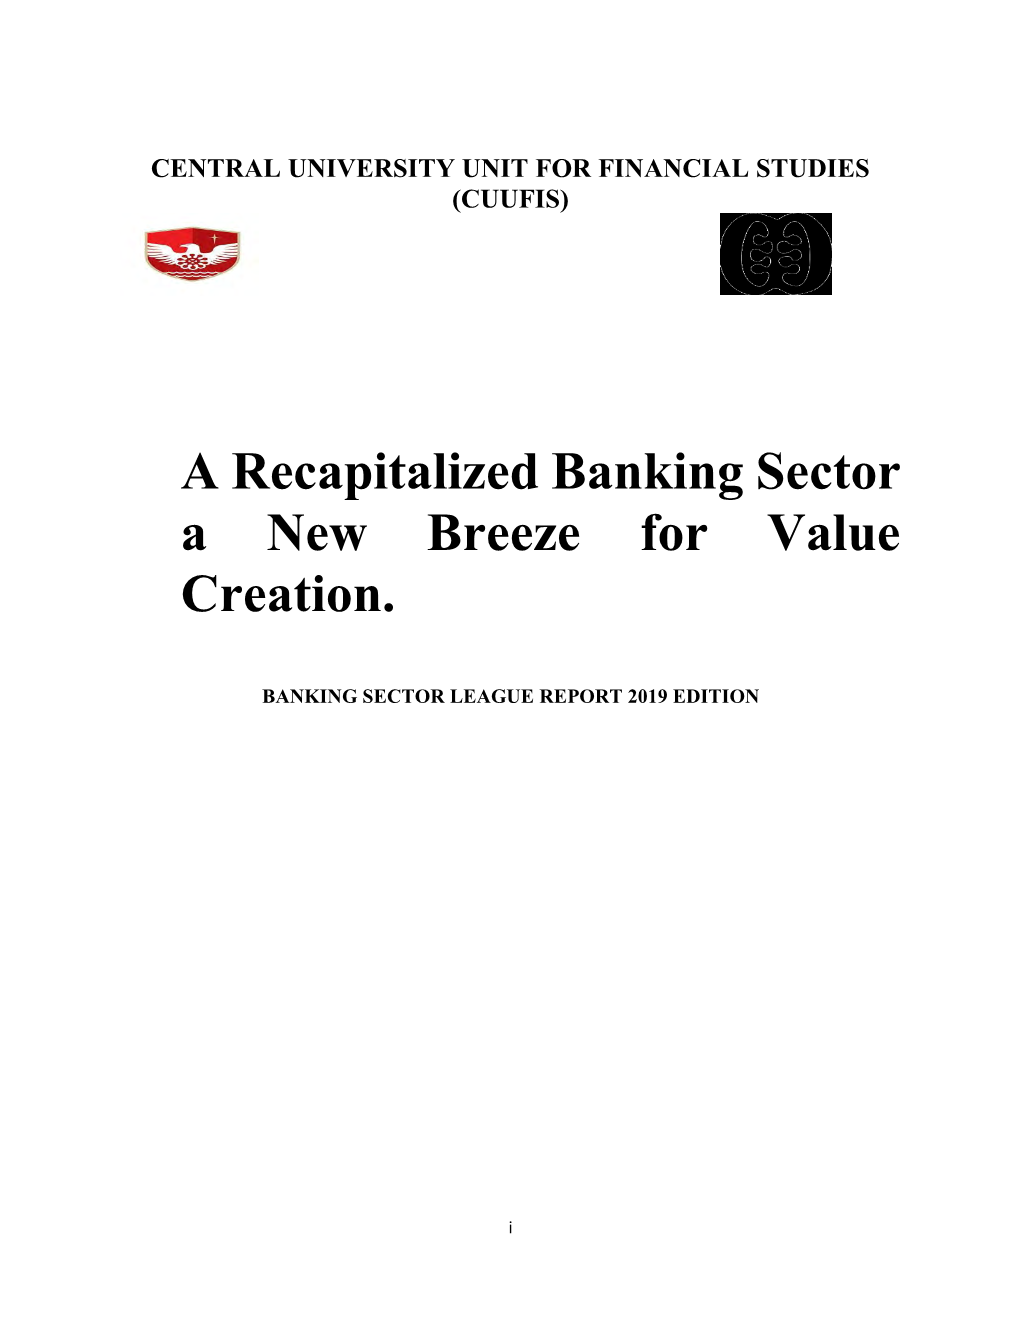 A Recapitalized Banking Sector a New Breeze for Value Creation